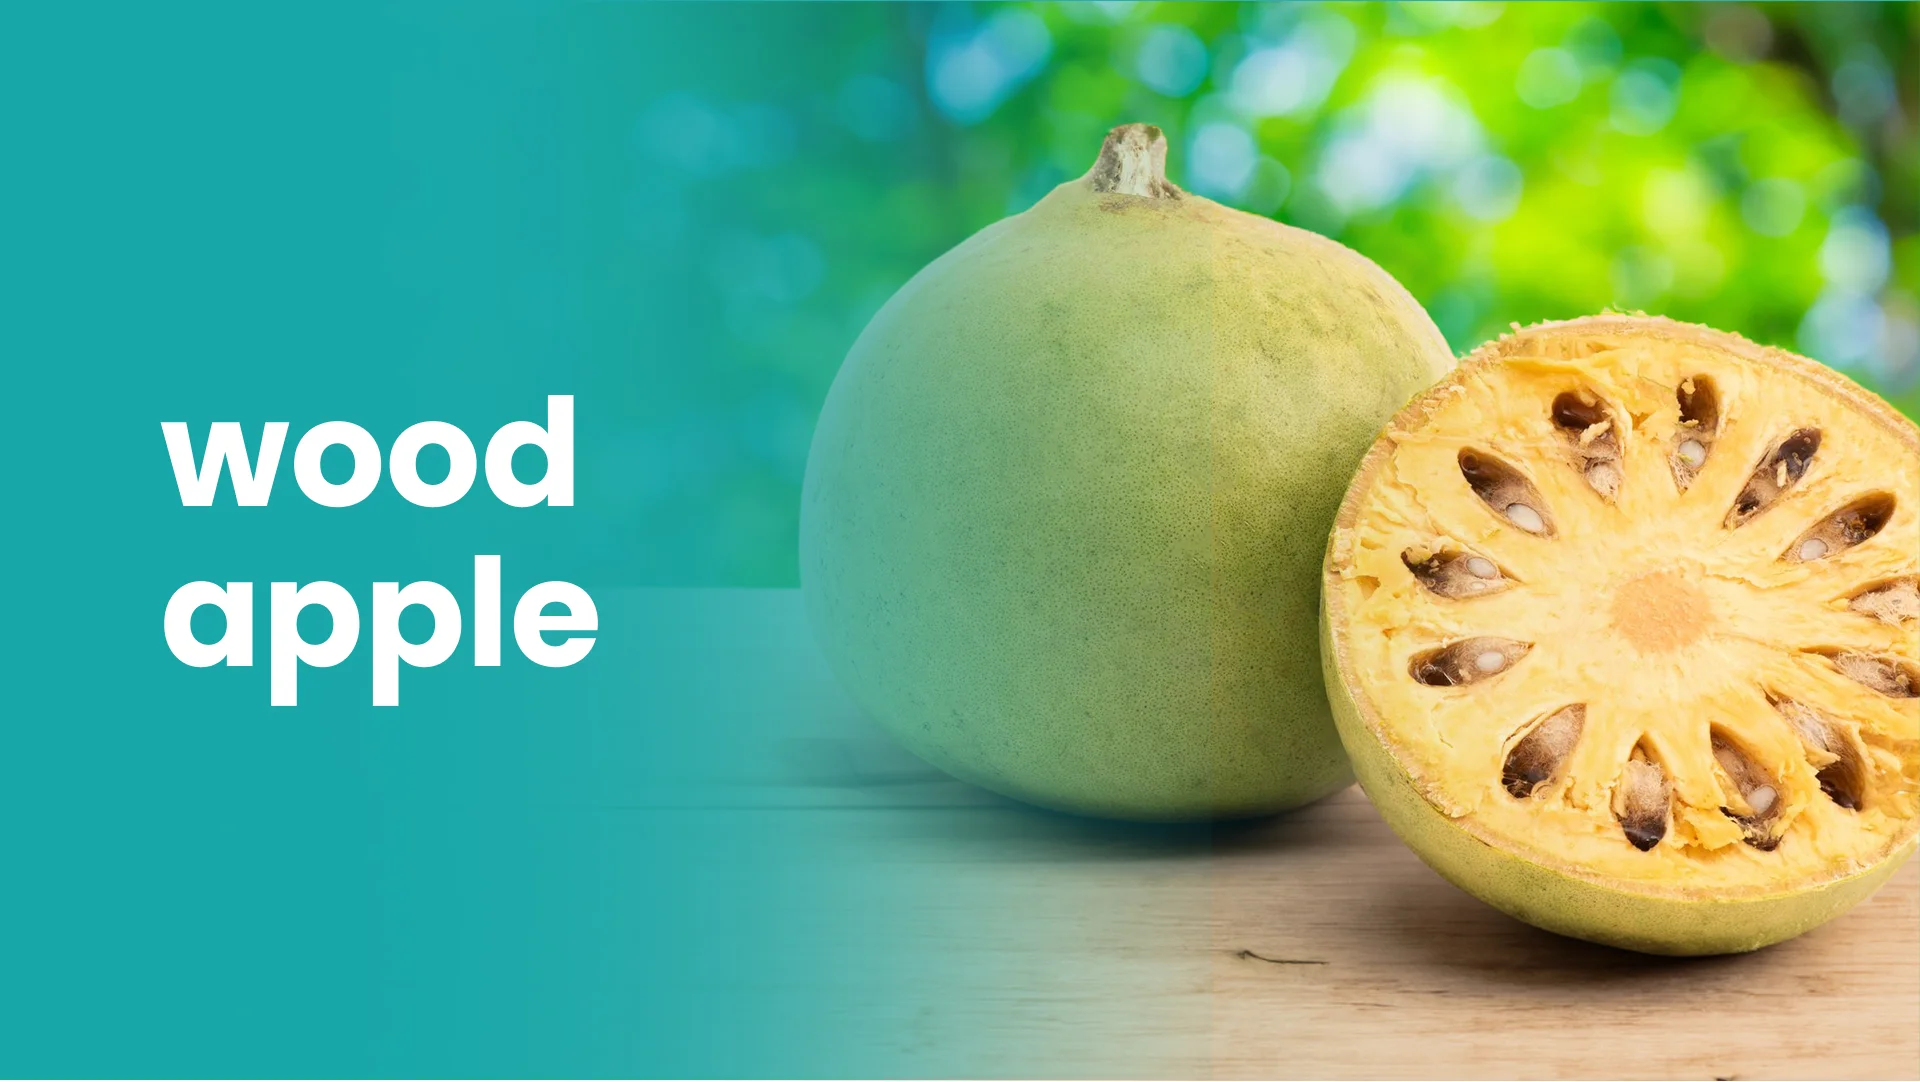 Course Trailer: Wood Apple Farming Course - Earn 3 lakh/acre. Watch to know more.